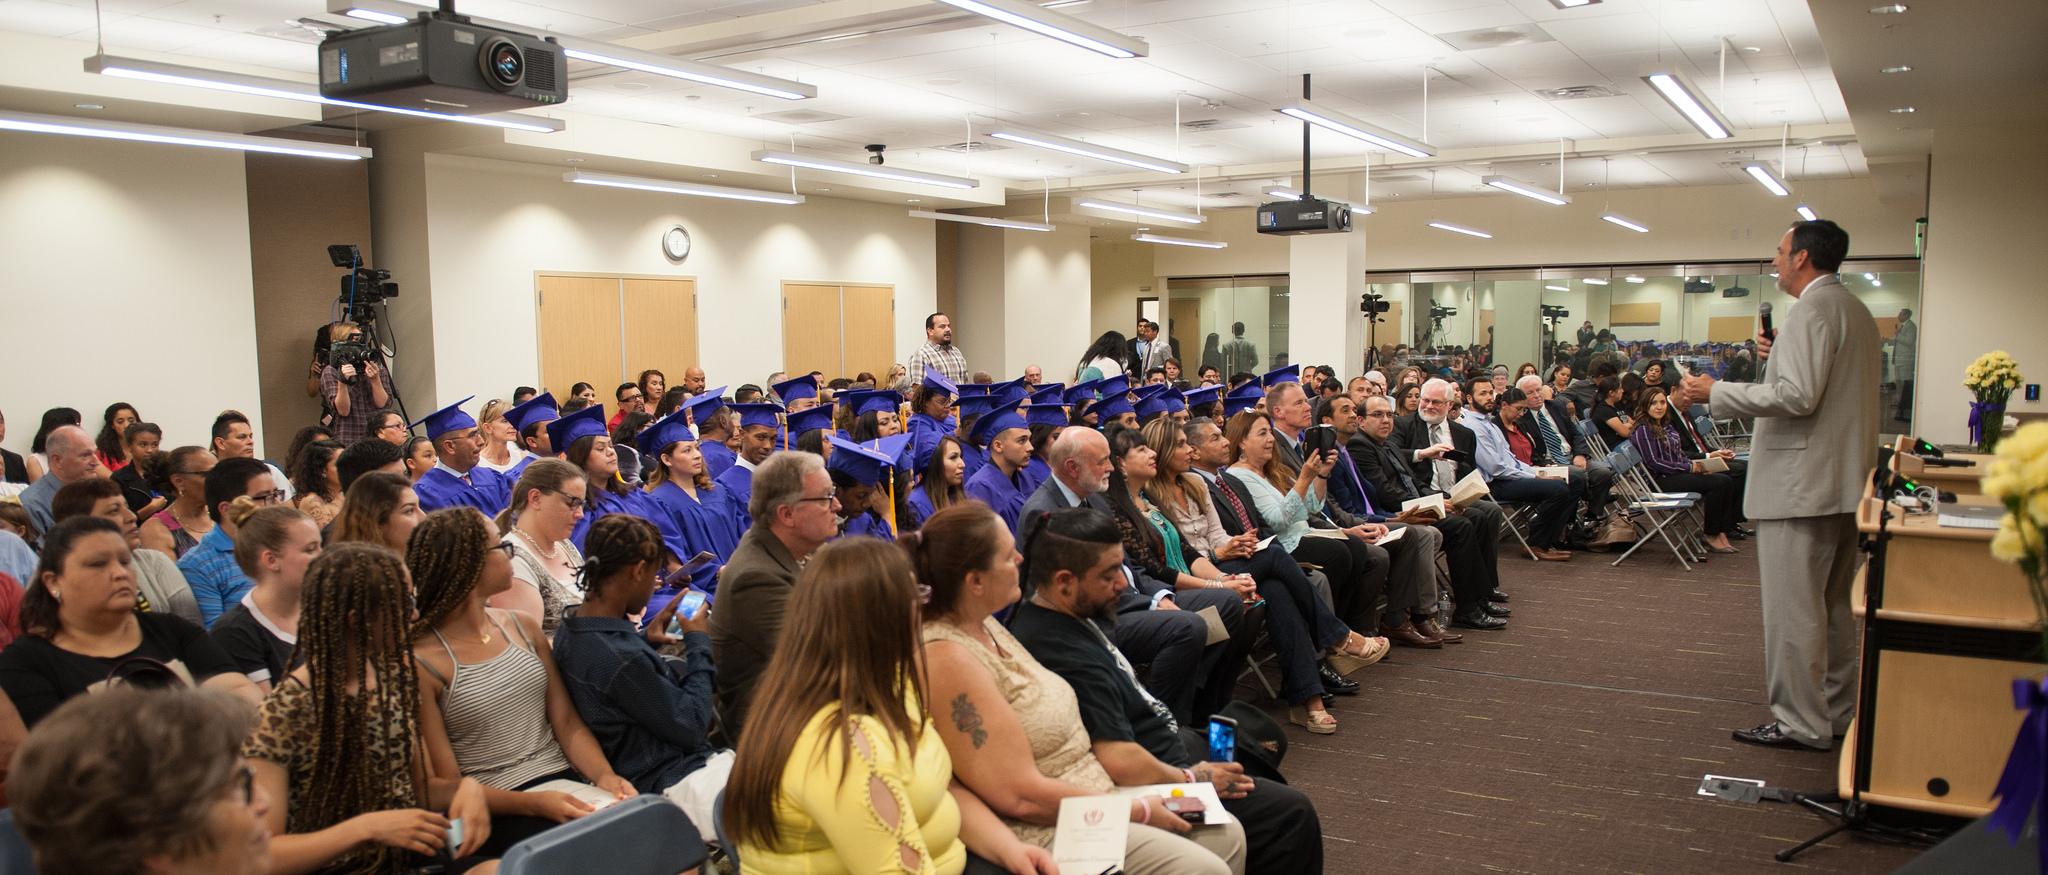 The pioneering first students of San Manuel Gateway College prepare to graduate on June 7, 2017.Photo provided by Loma Linda University Health